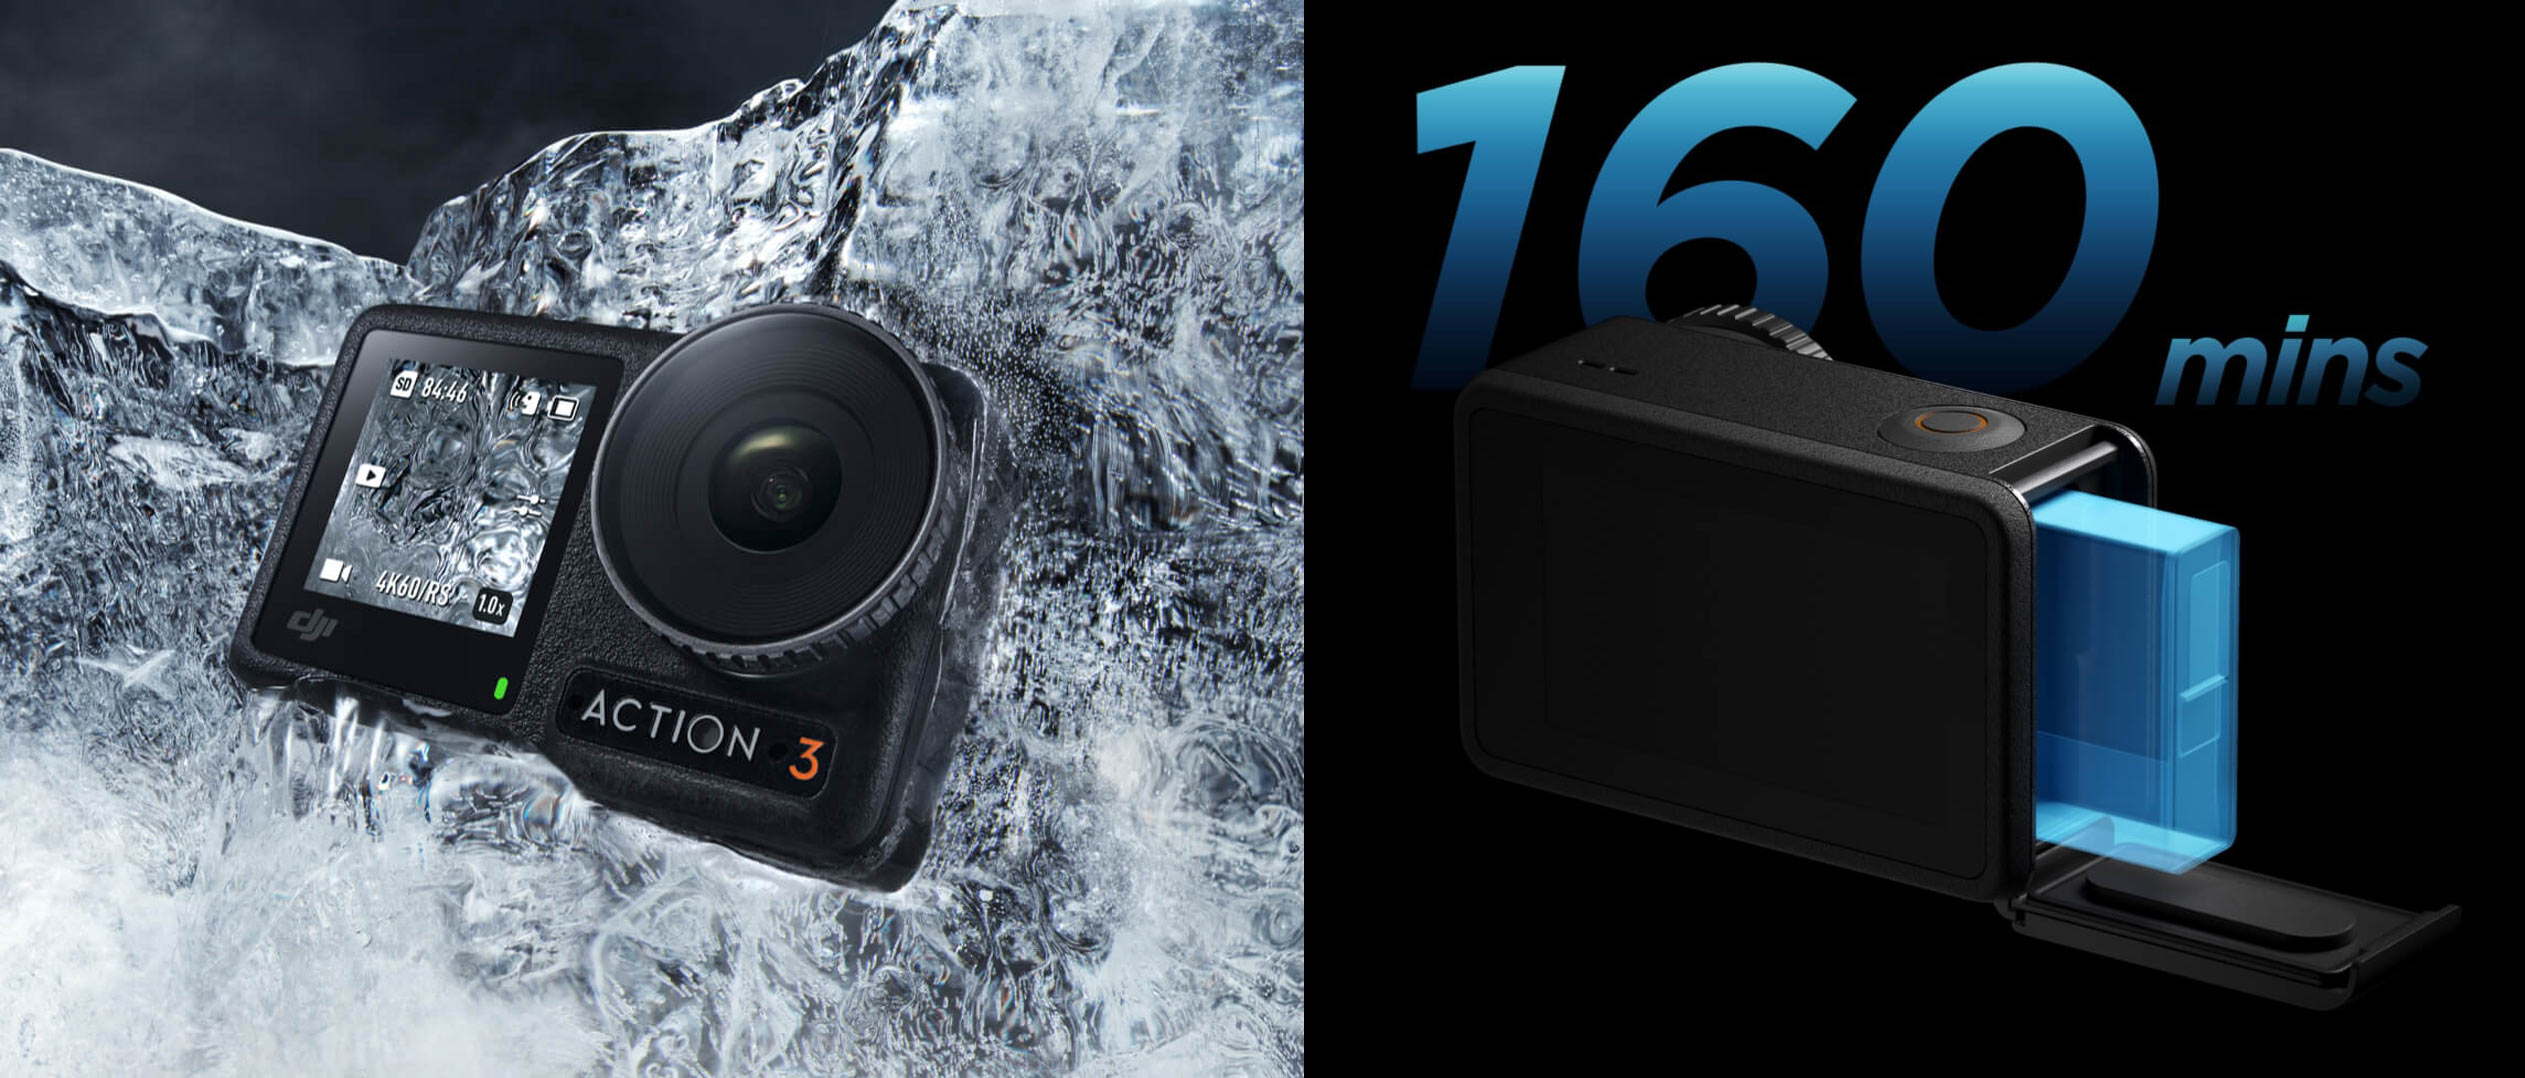 dji osmo action 3 camera shown in ice with longer lasting battery